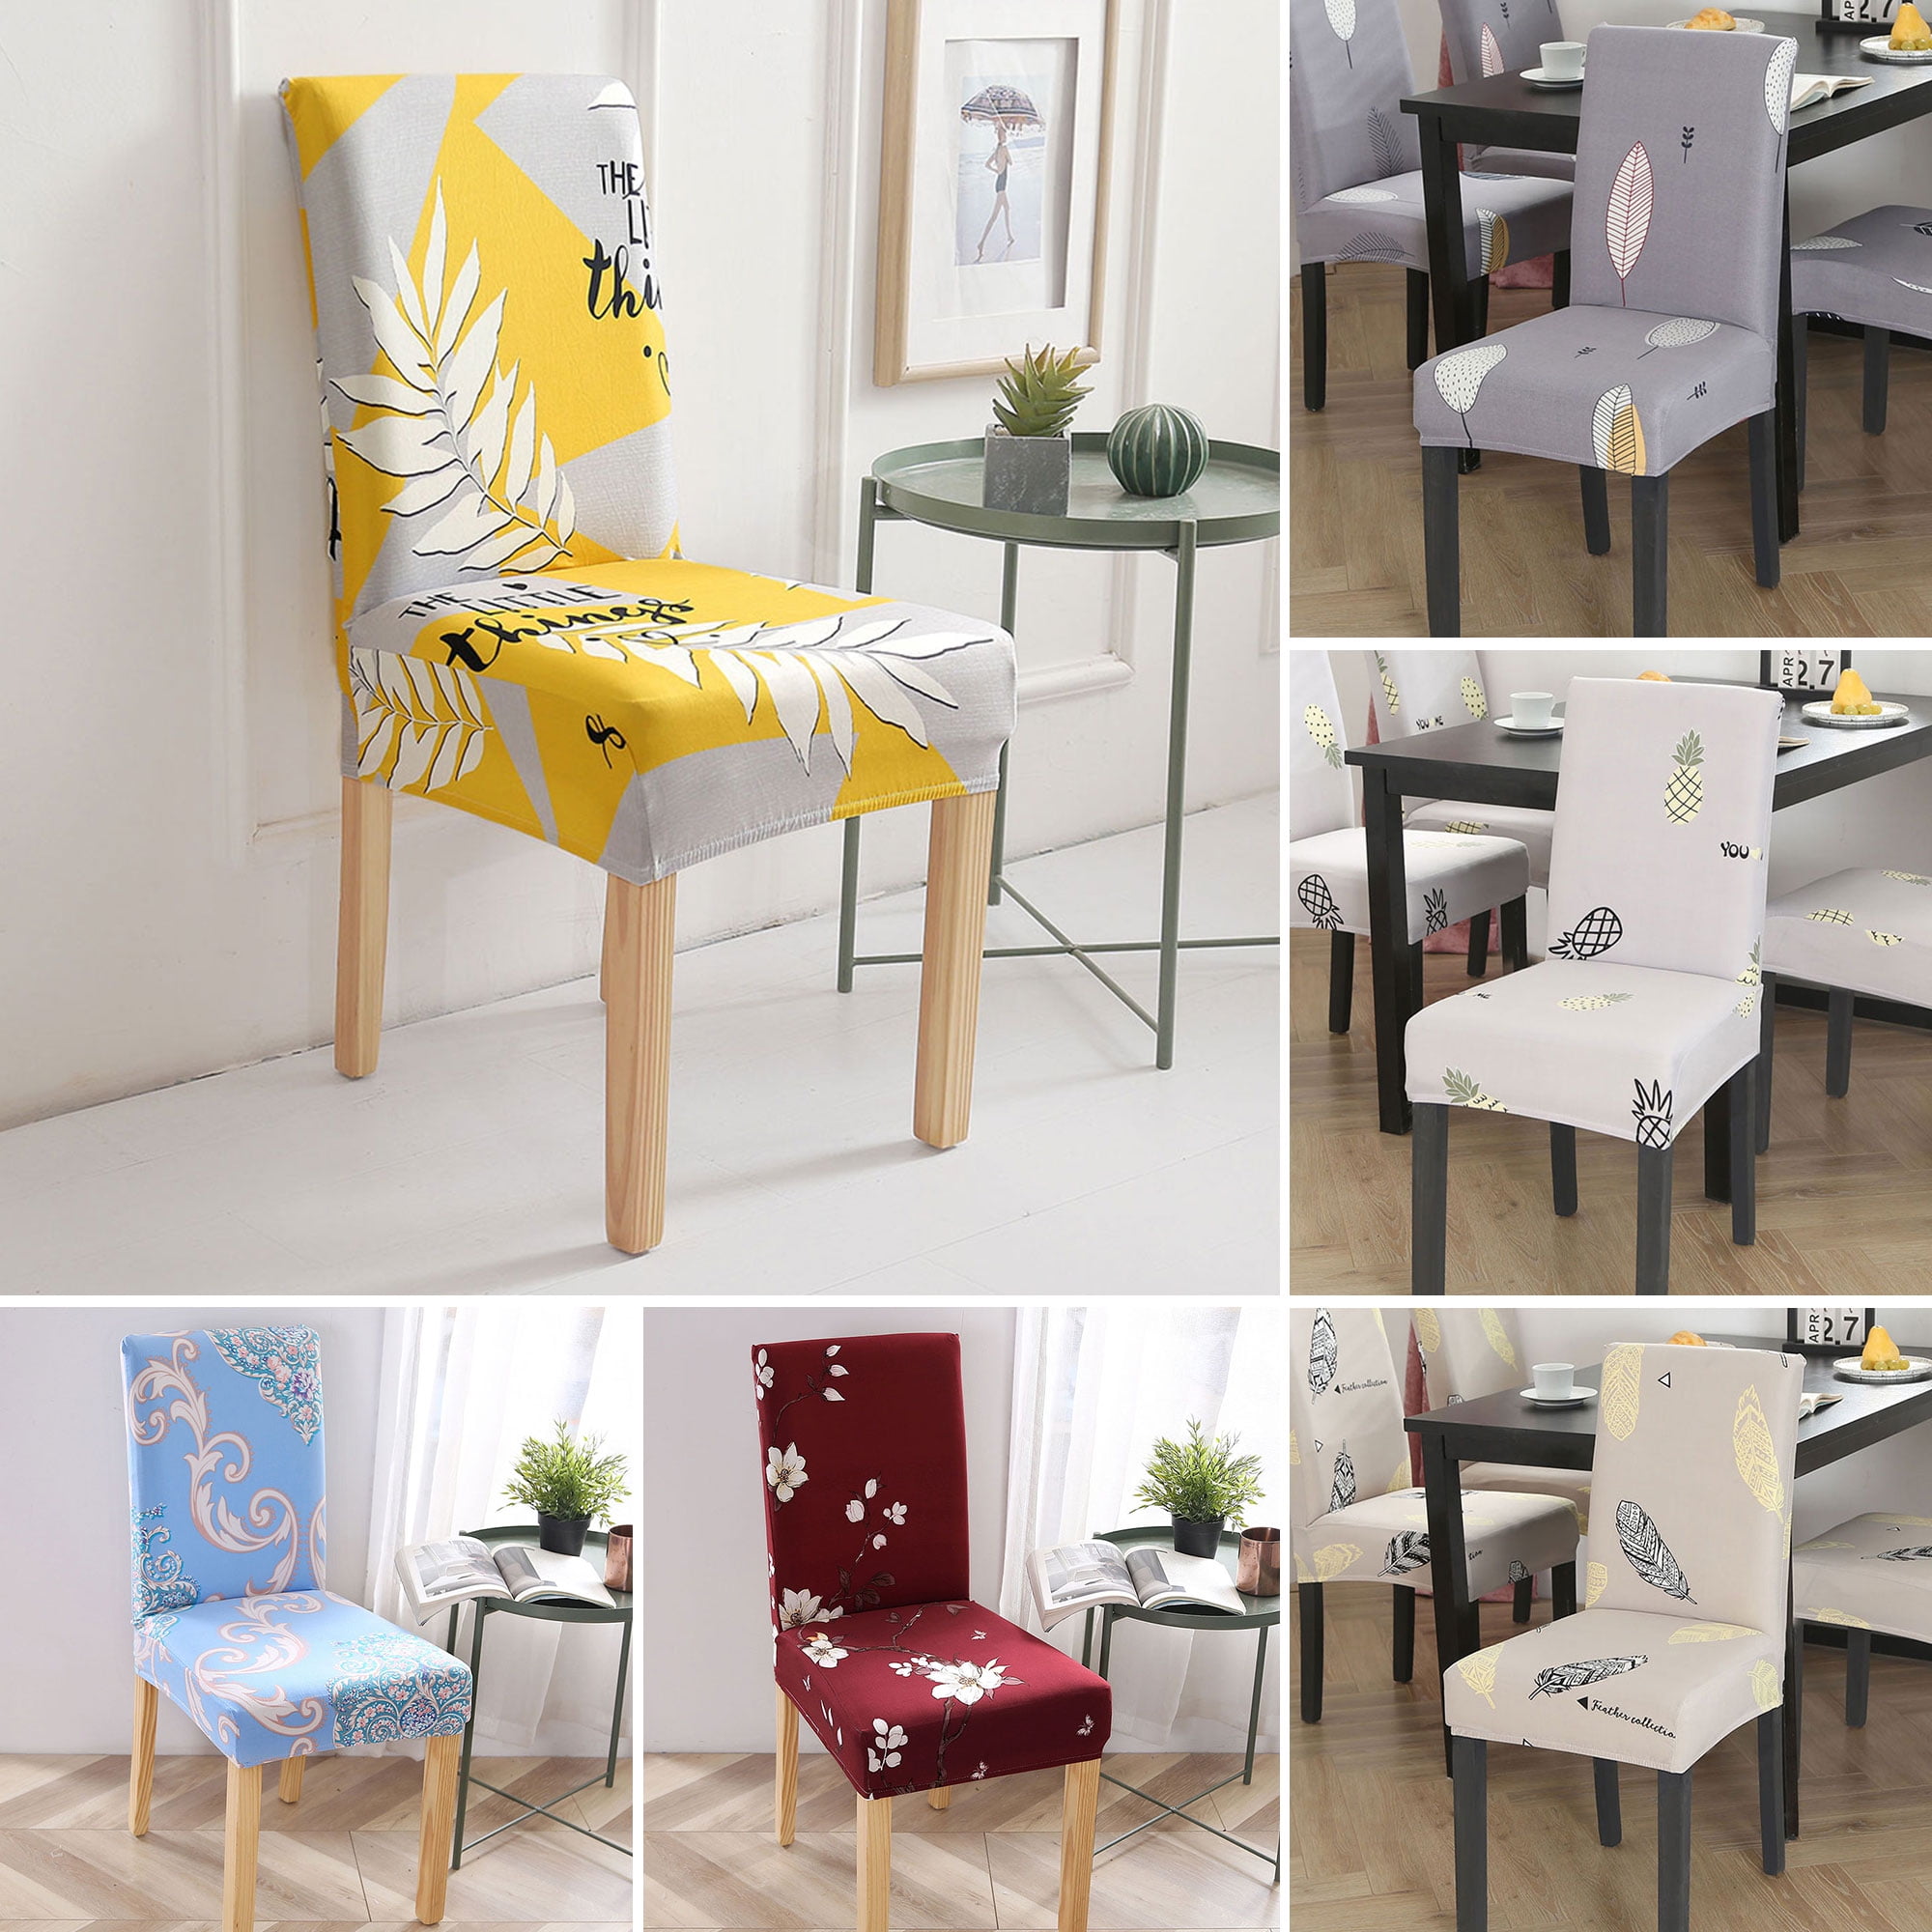 4x Kitchen Dining Room Chair Seat Cover Elastic Tall Stool Slipcover Replacement 